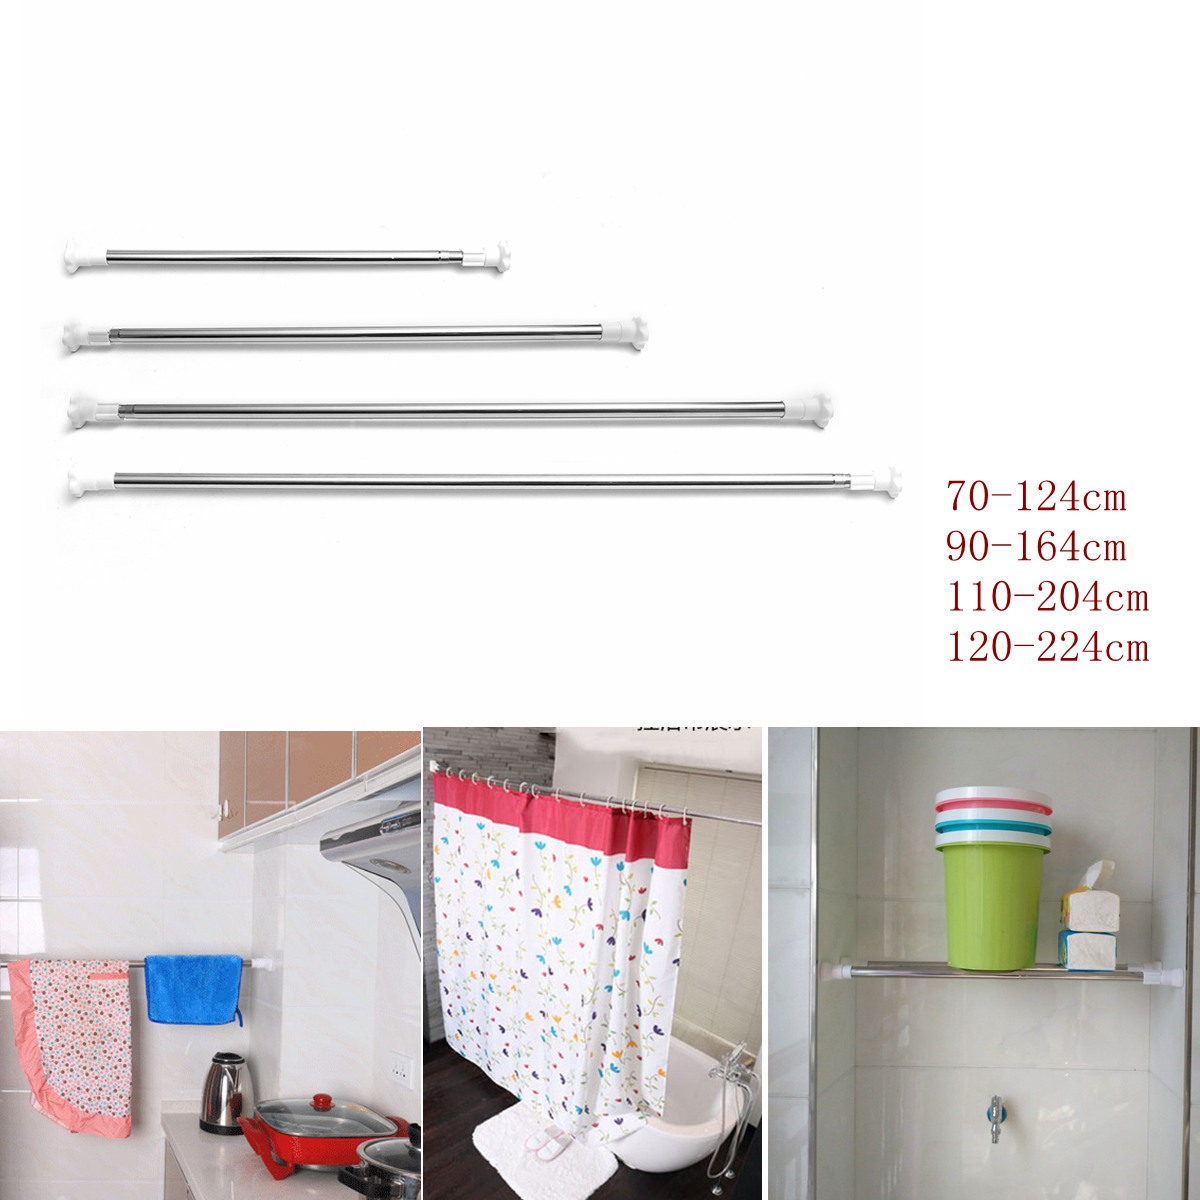 Spring Loaded Extendable Rod Adjustable Curtain Clothes Rail Rods 70cm-124cm 